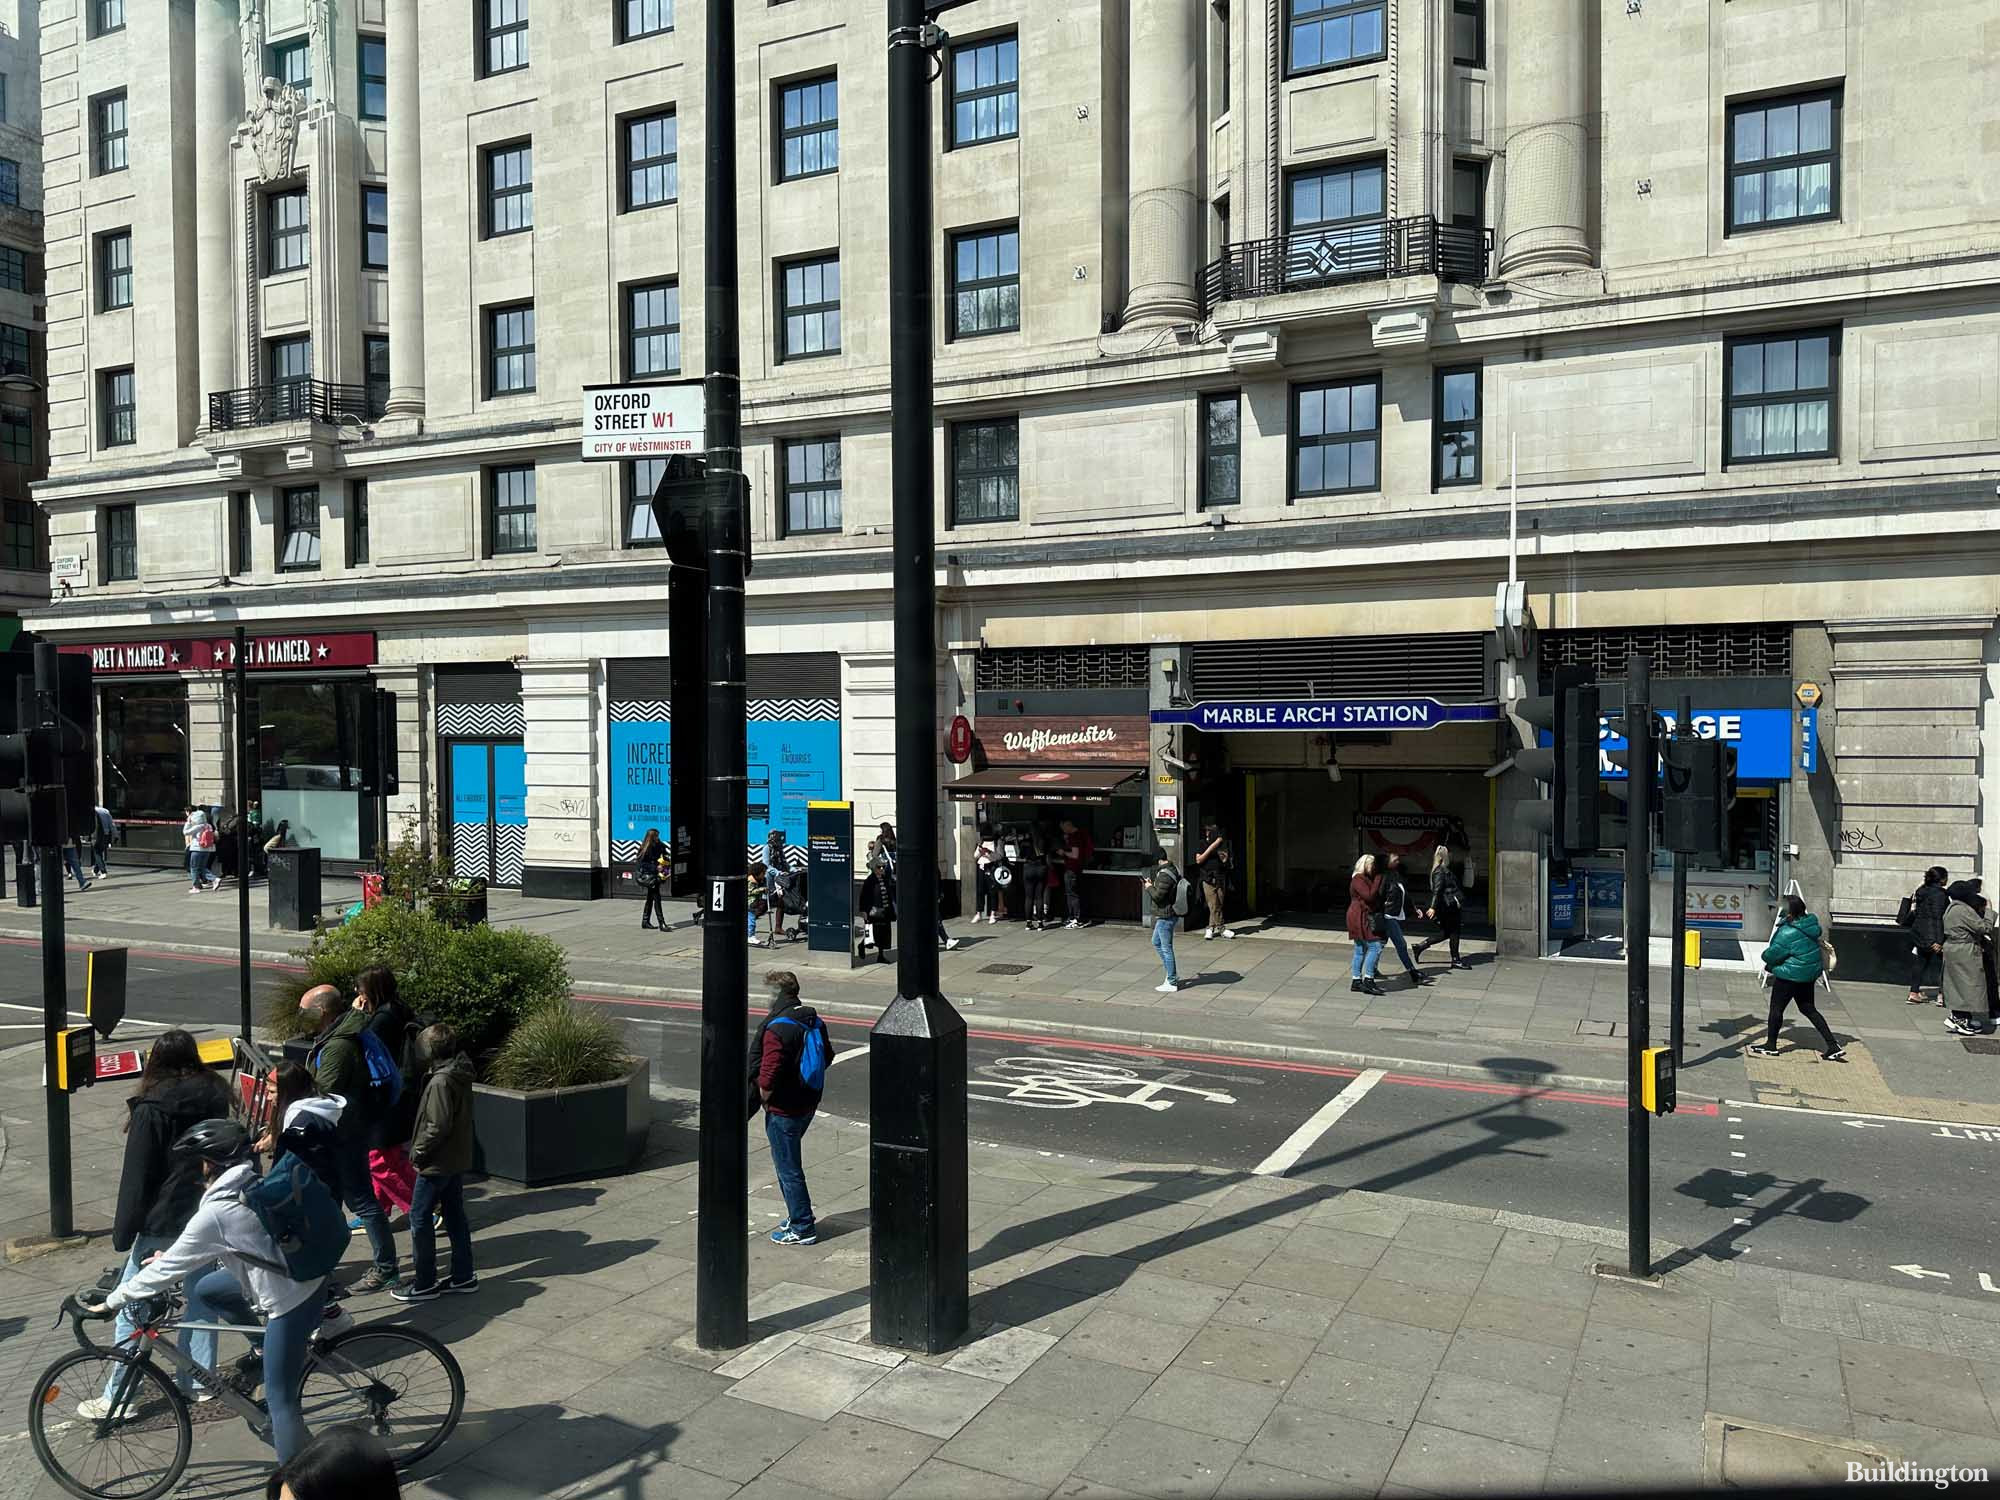 Marble Arch Station on Central Line with entrance on the ground level of The Cumberland hotel on Oxford Street in London W1.